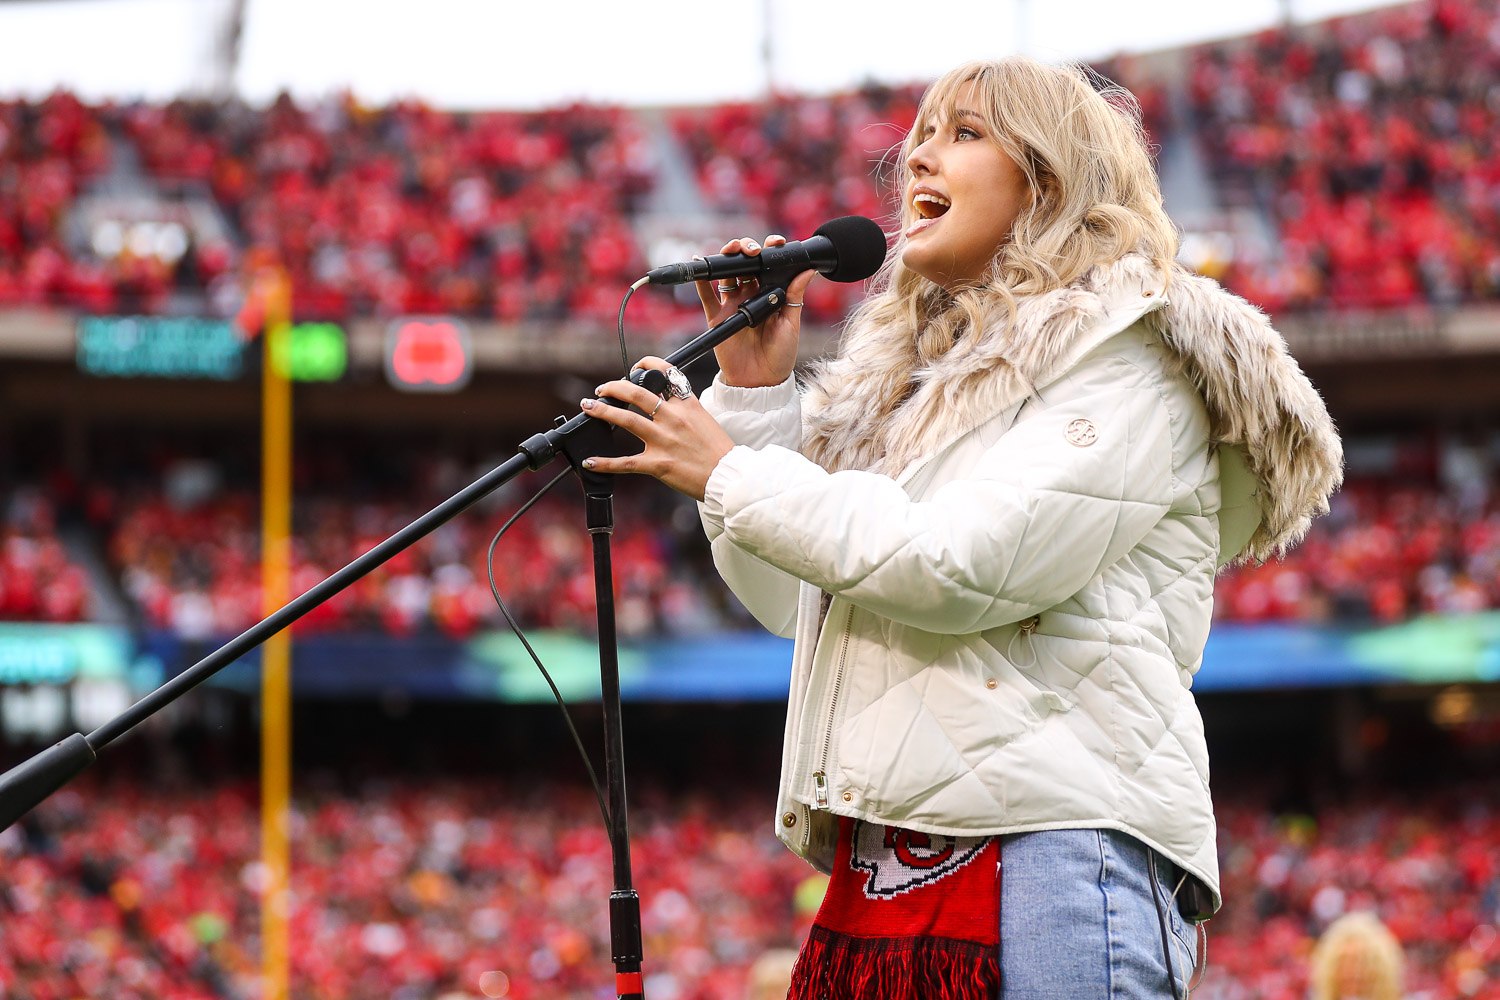 Madelyn Jarmon sings the National Anthem prior to an NFL football game against the Pittsburgh Steelers, Sunday, December 26, 2021 in Kansas City.